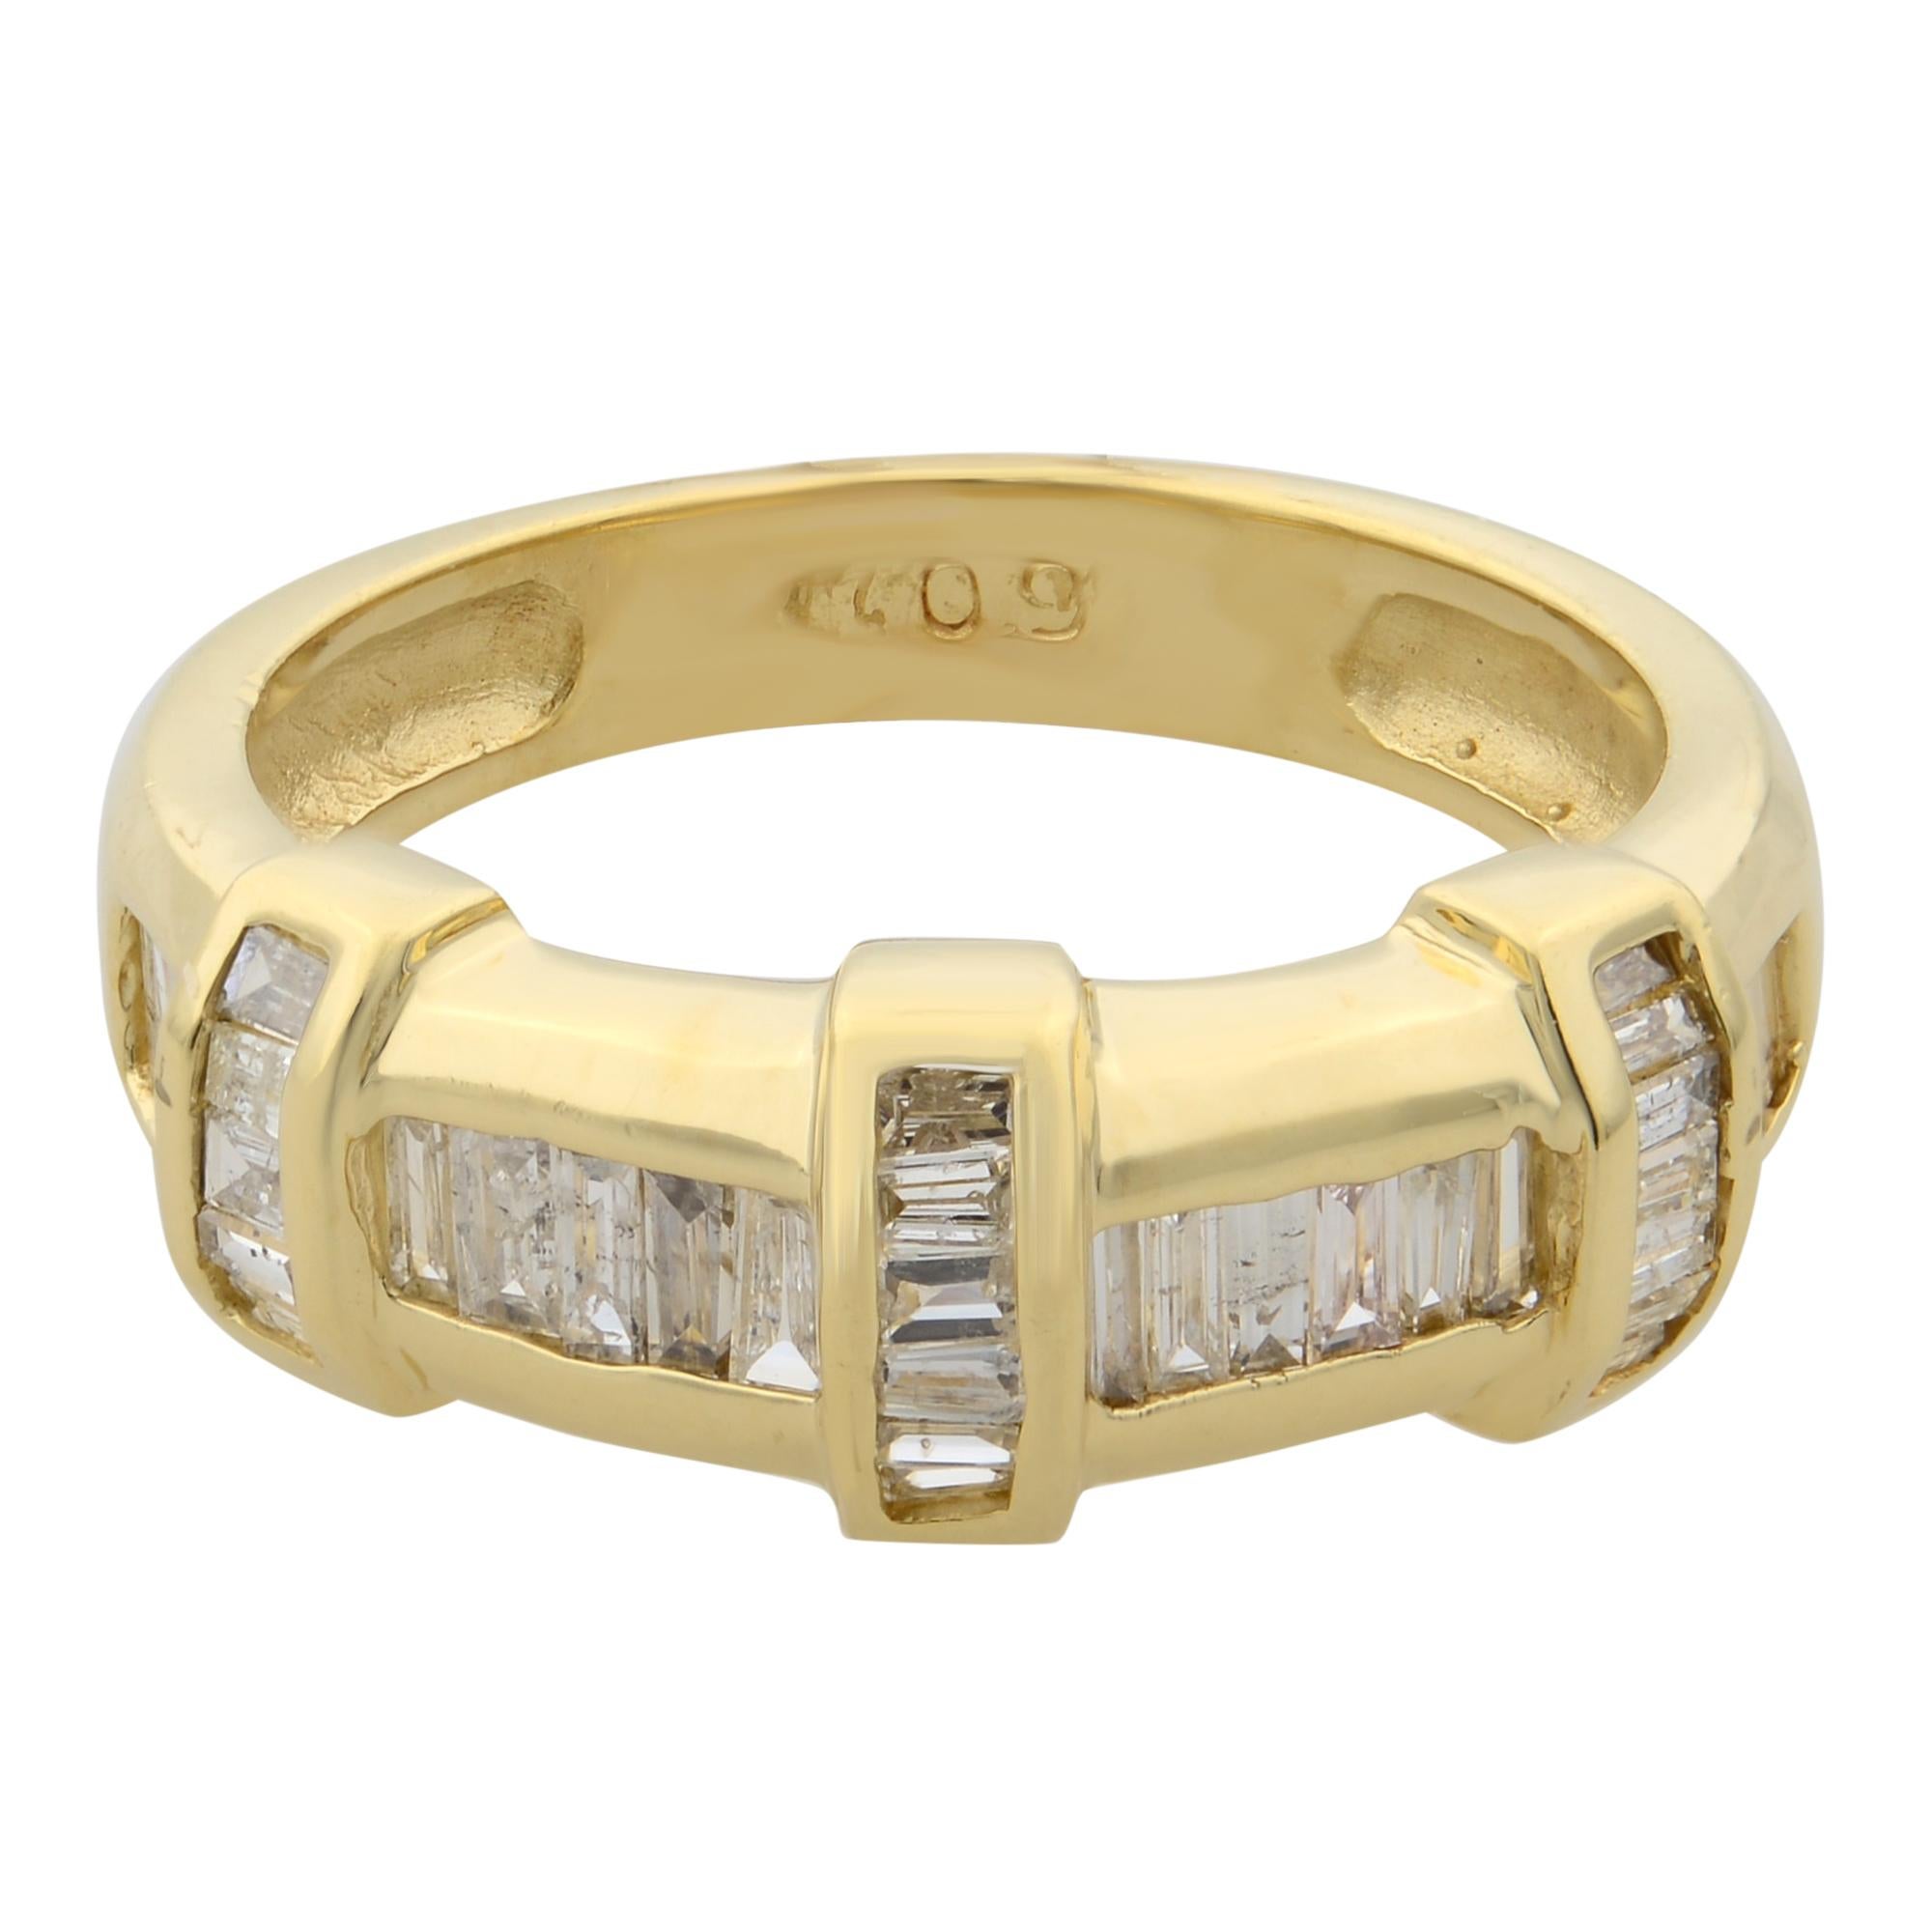 This beautiful band ring features white baguette cut diamonds lined up in a channel setting to create a faceted passageway that glimmers as it bends around the finger. Crafted in high polished 14k yellow gold. Diamond color I-J and I clarity. Total